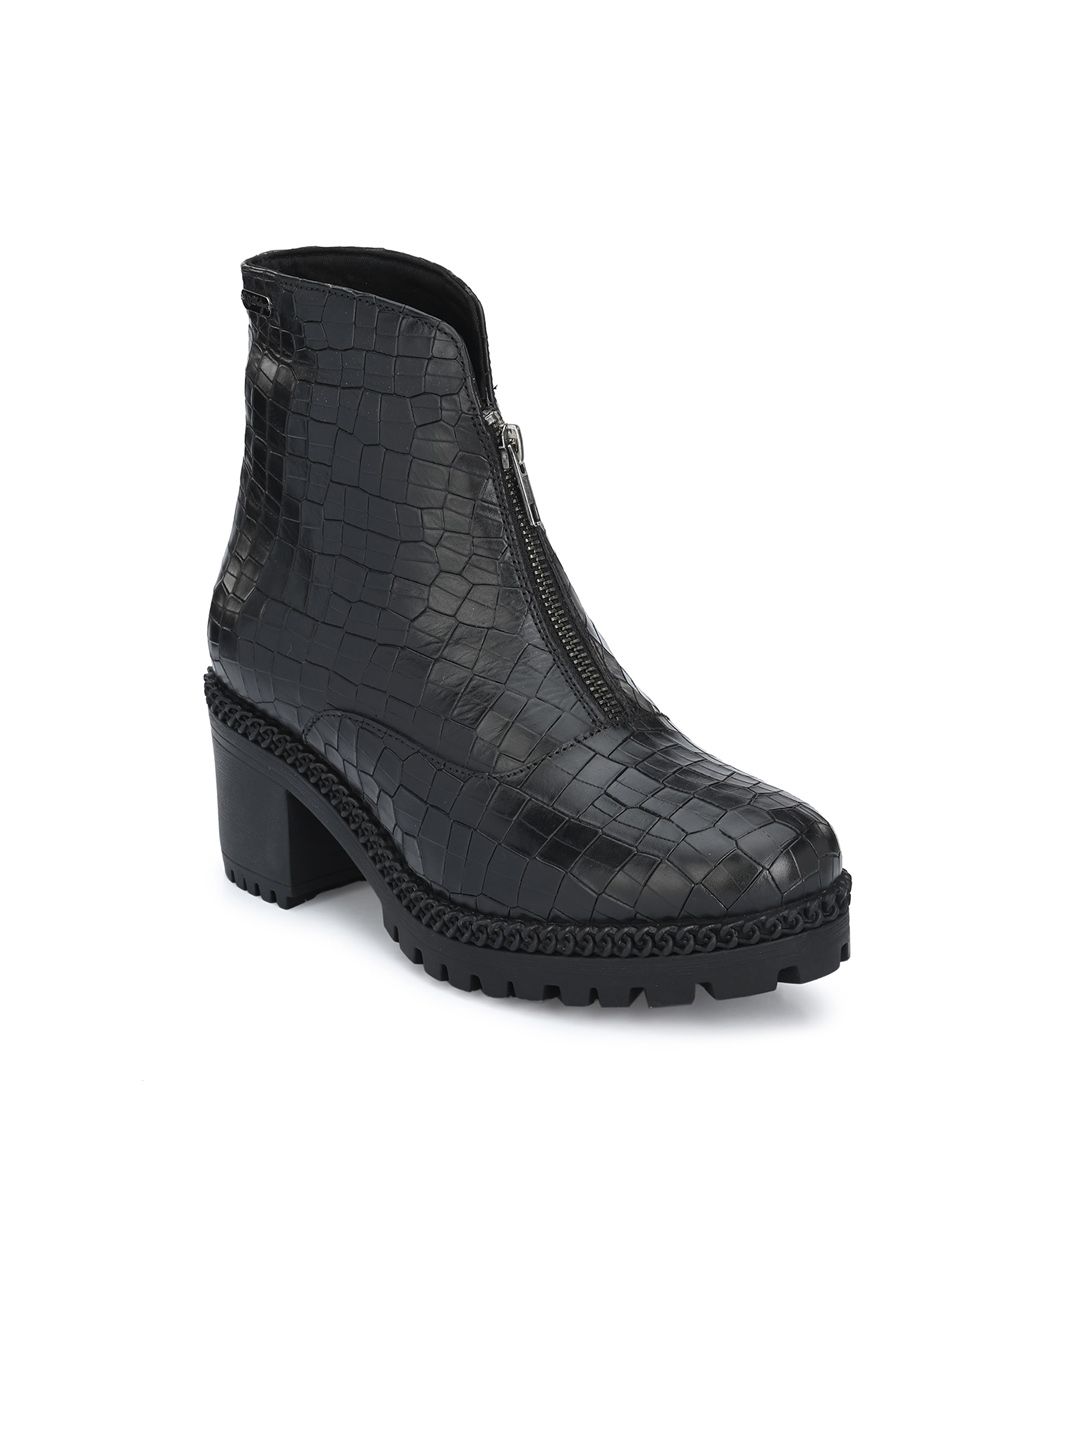 Delize Black Leather Platform Heeled Boots Price in India